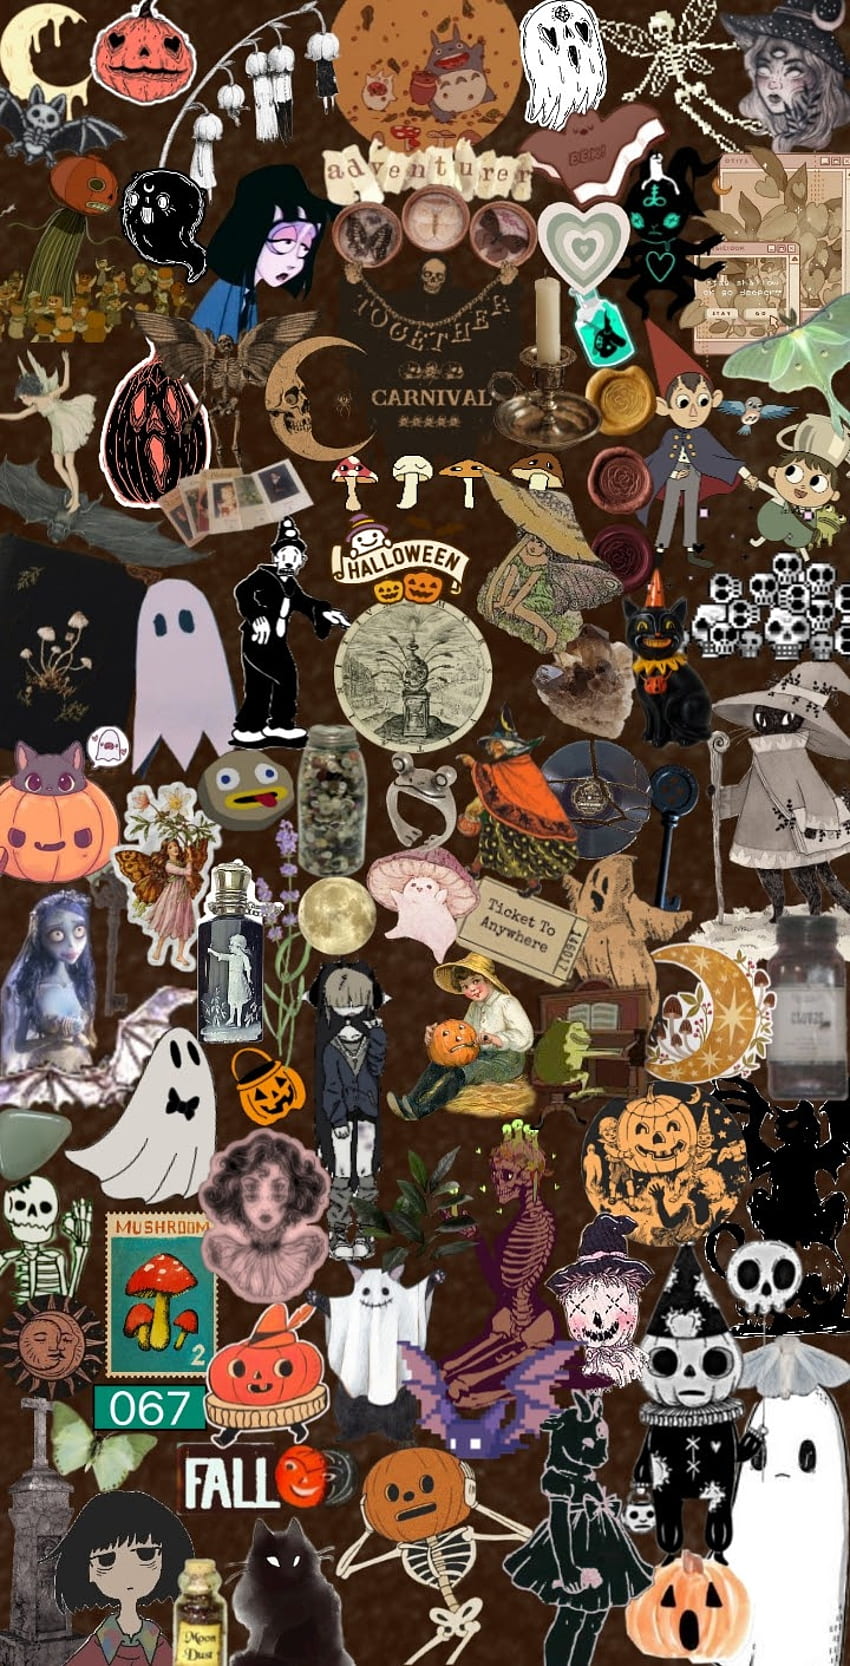 1366x768px, 720P Free download | Halloween Aesthetic, spooky, vibes ...